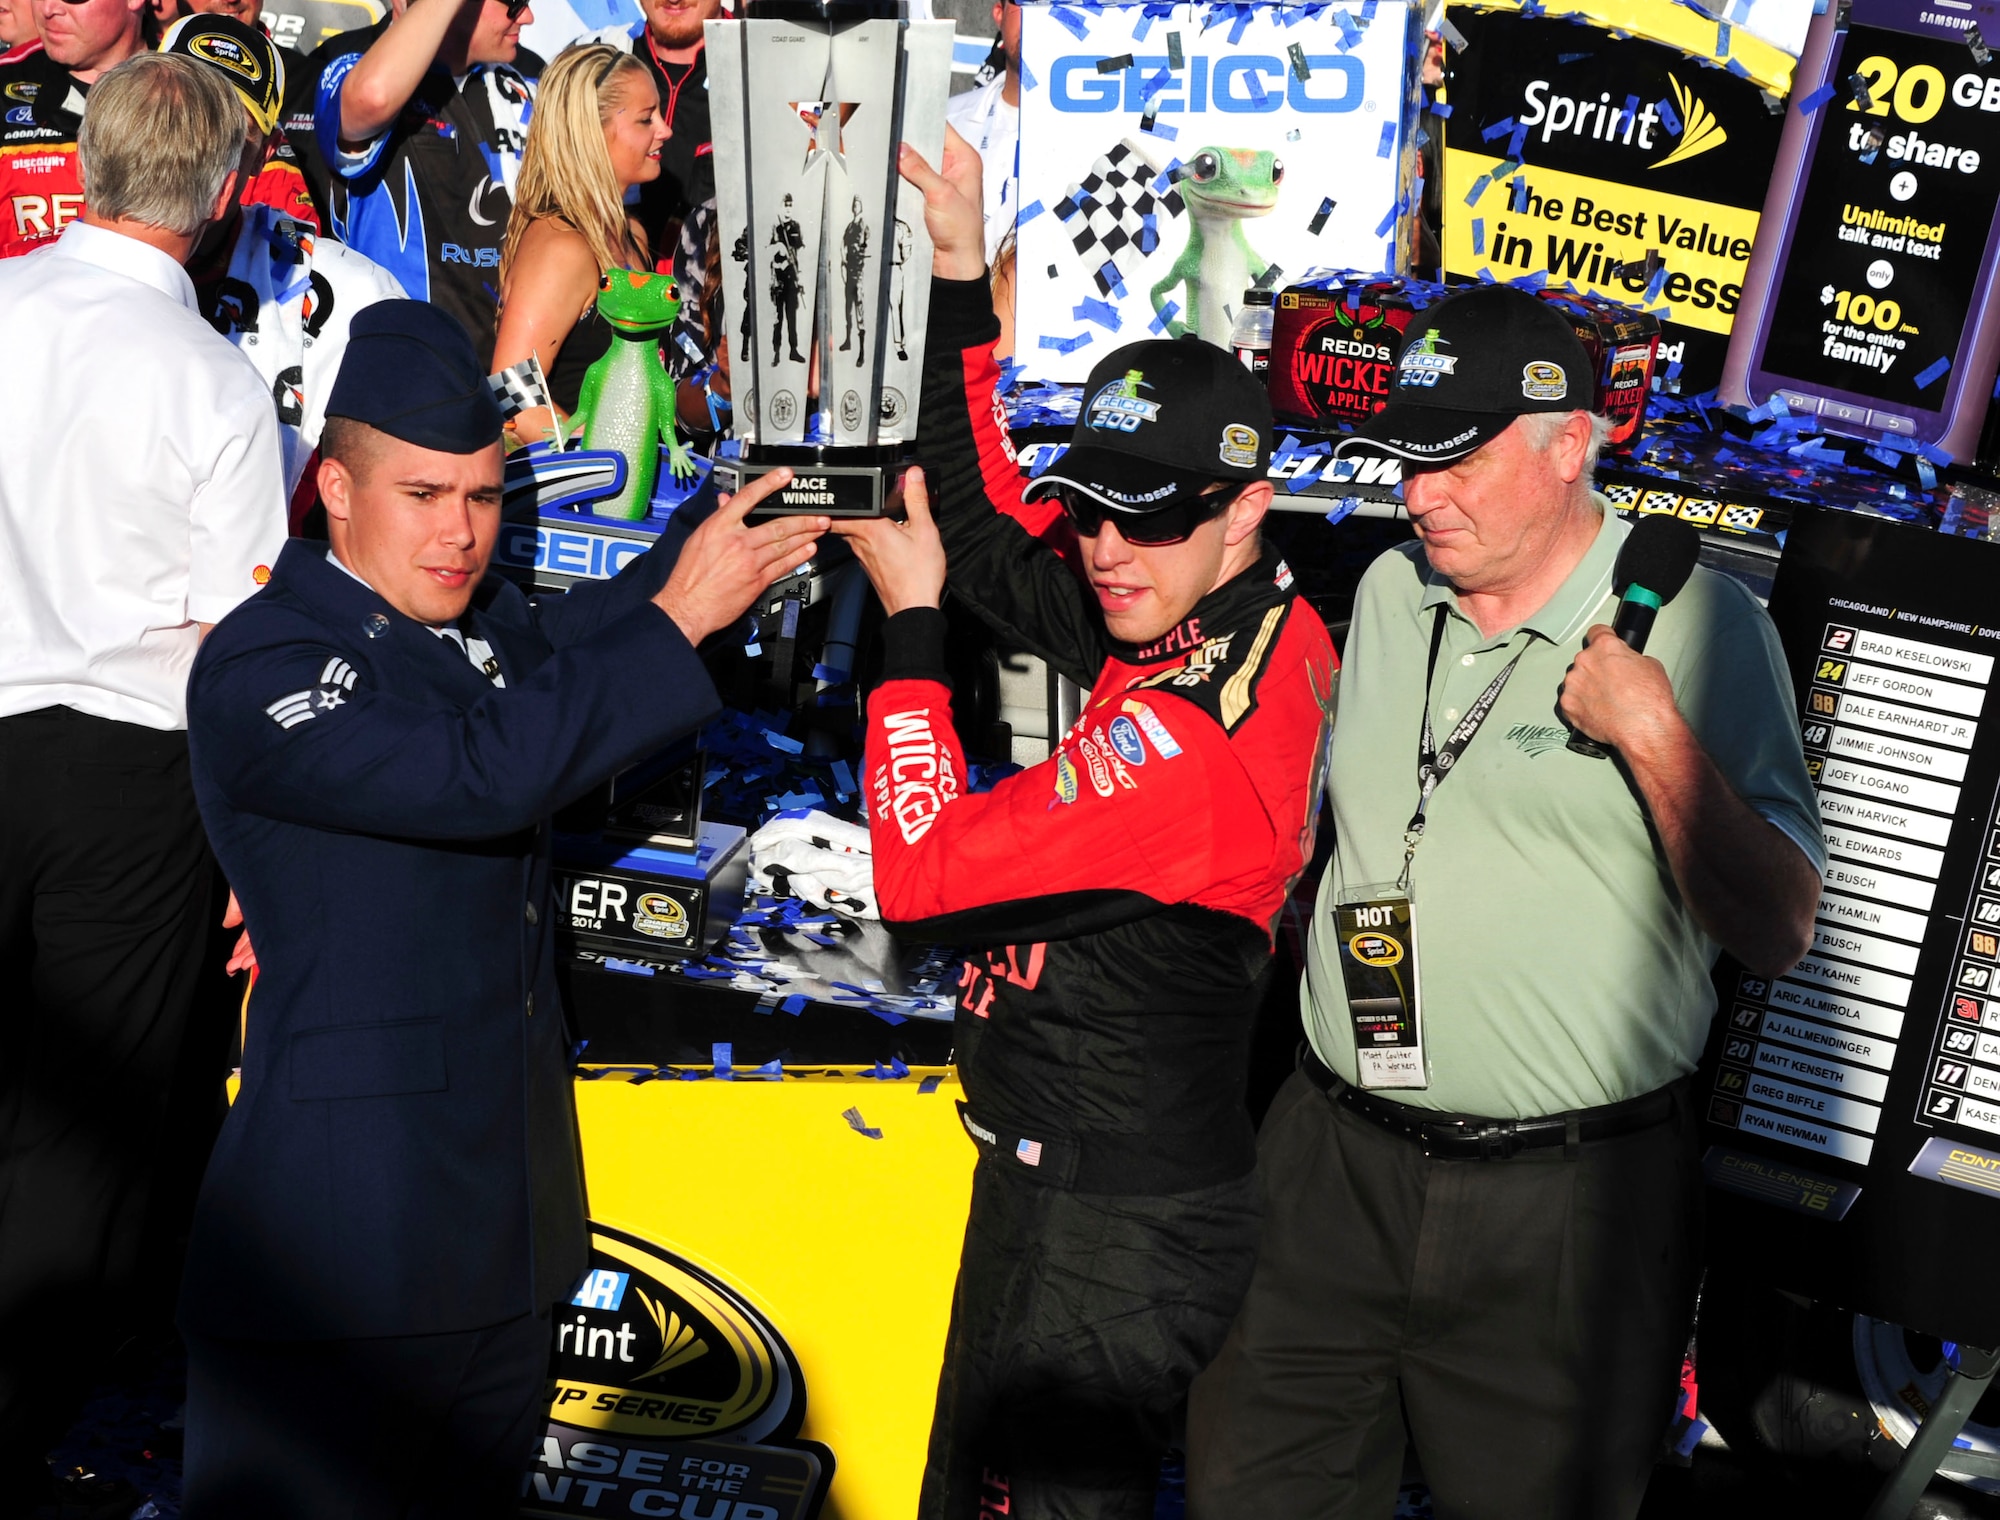 Senior Airman Donald Googe Jr., 42nd Air Base Wing Legal Office paralegal, presents the Freedom Trophy to the Geico 500 winner, Brad Keselowski, at the Talladega Superspeedway in Talladega, Ala., Oct. 19, 2014. The Freedom Trophy showcases the five branches of the military to honor and recognize  military members. (U.S. Air Force photo by Airman 1st Class Alexa Culbert)